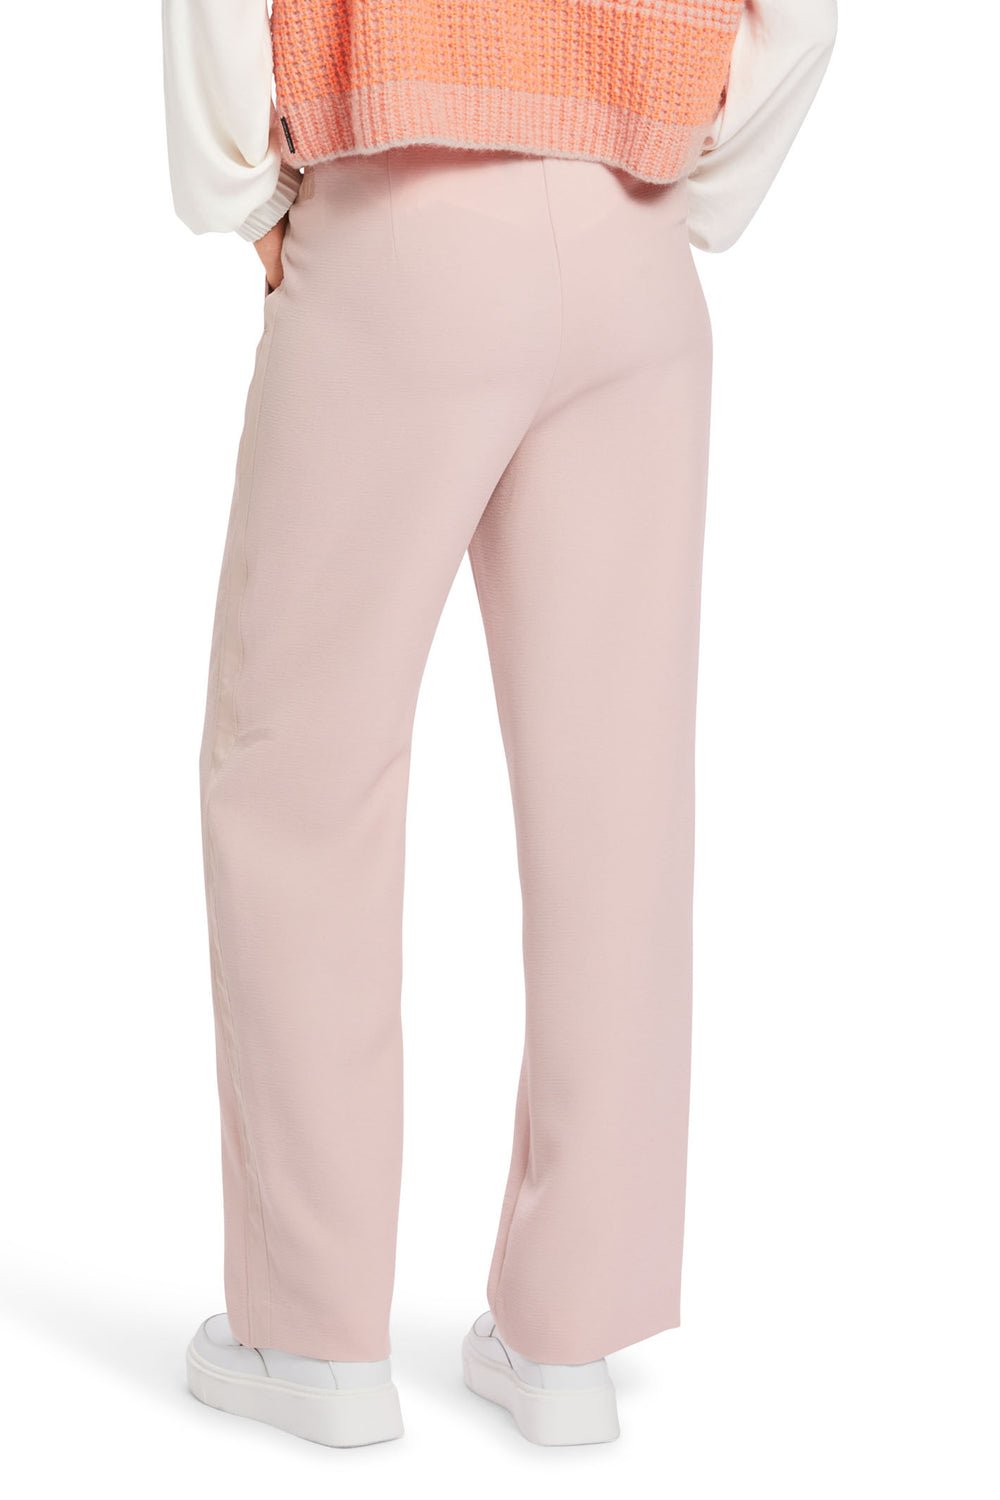 Marc Cain Sports Pull On Trousers Rosewater Pink XS 81.15 W12 168 - Olivia Grace Fashion